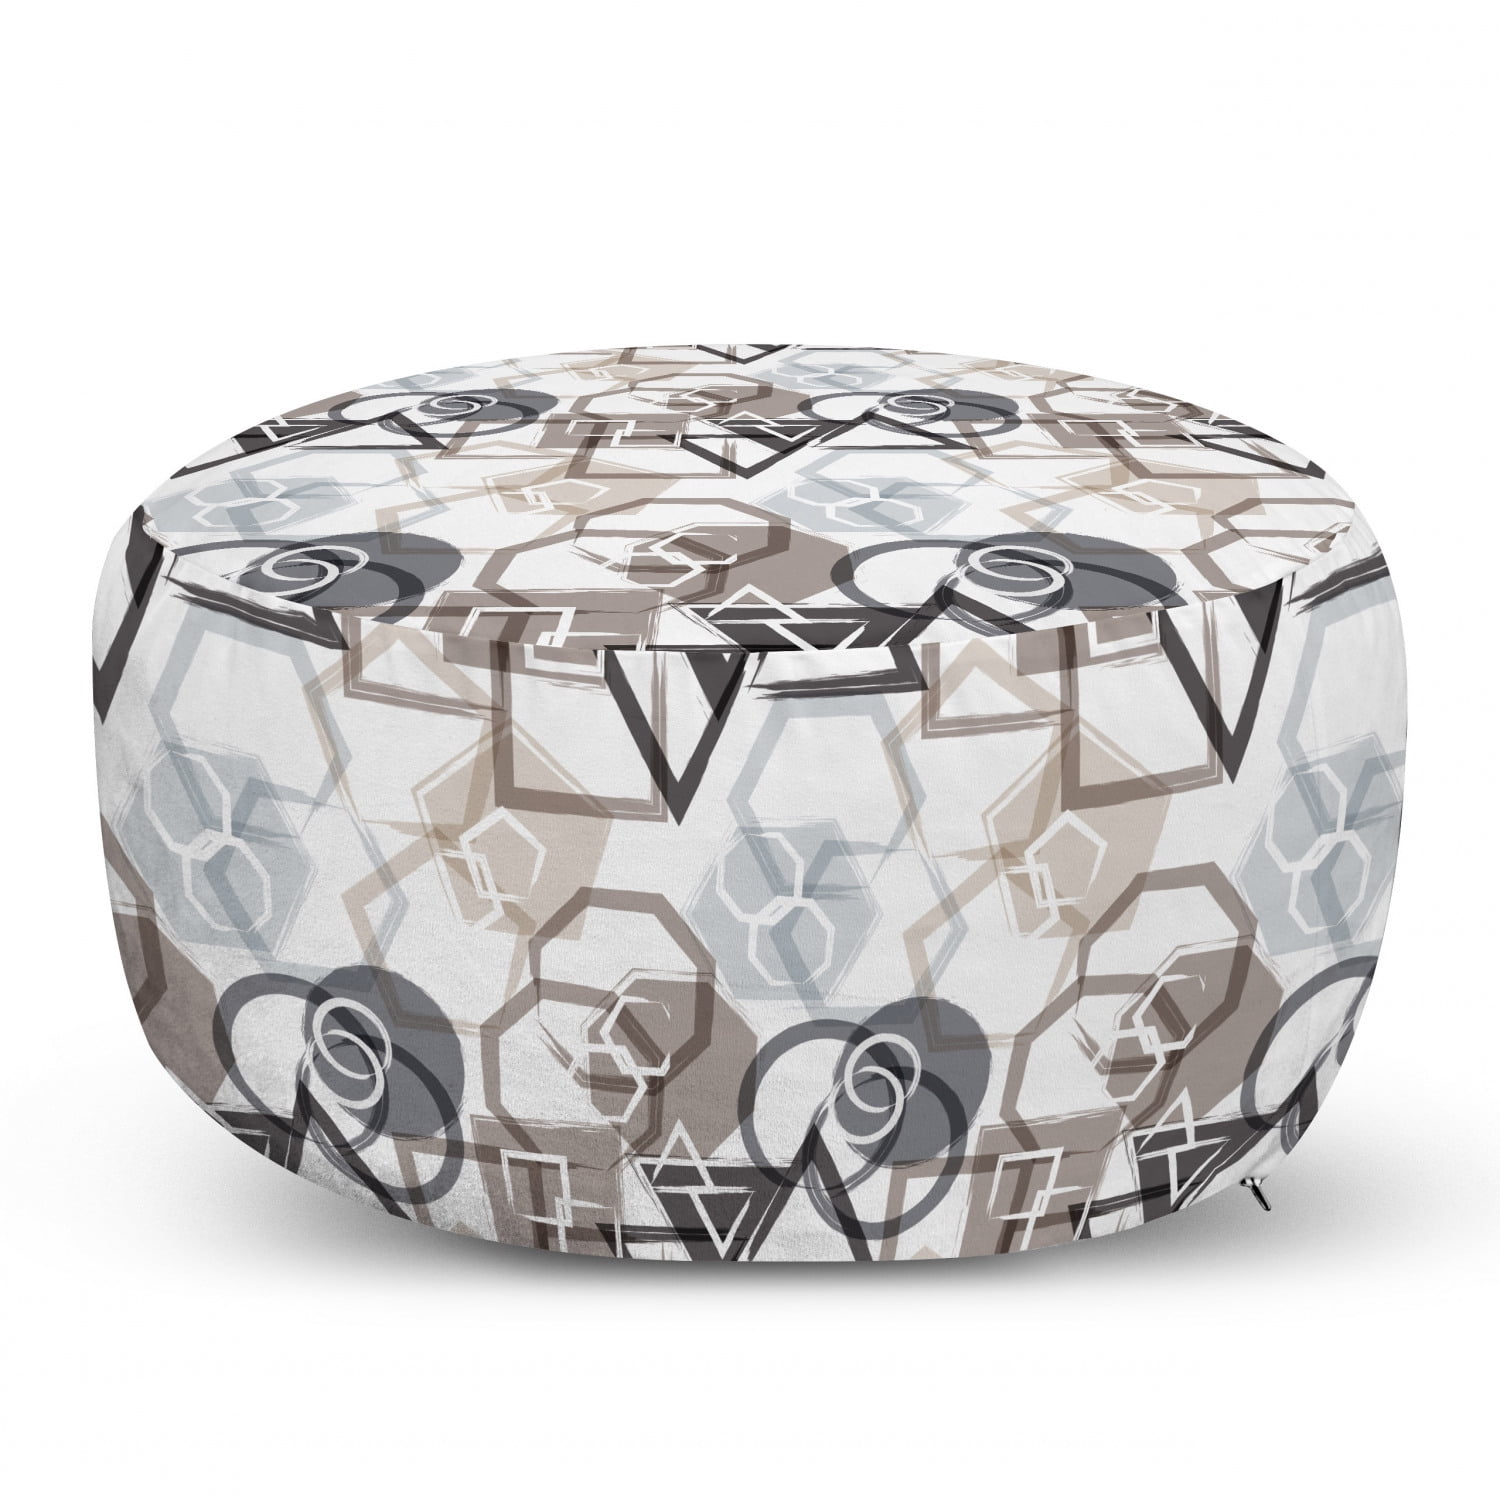 Oriental Composition with Geometric Rhombuses and Triangles Retro Inspirations 25 Under Desk Foot Stool for Living Room Office Ottoman with Cover Ambesonne Boho Rectangle Pouf Multicolor